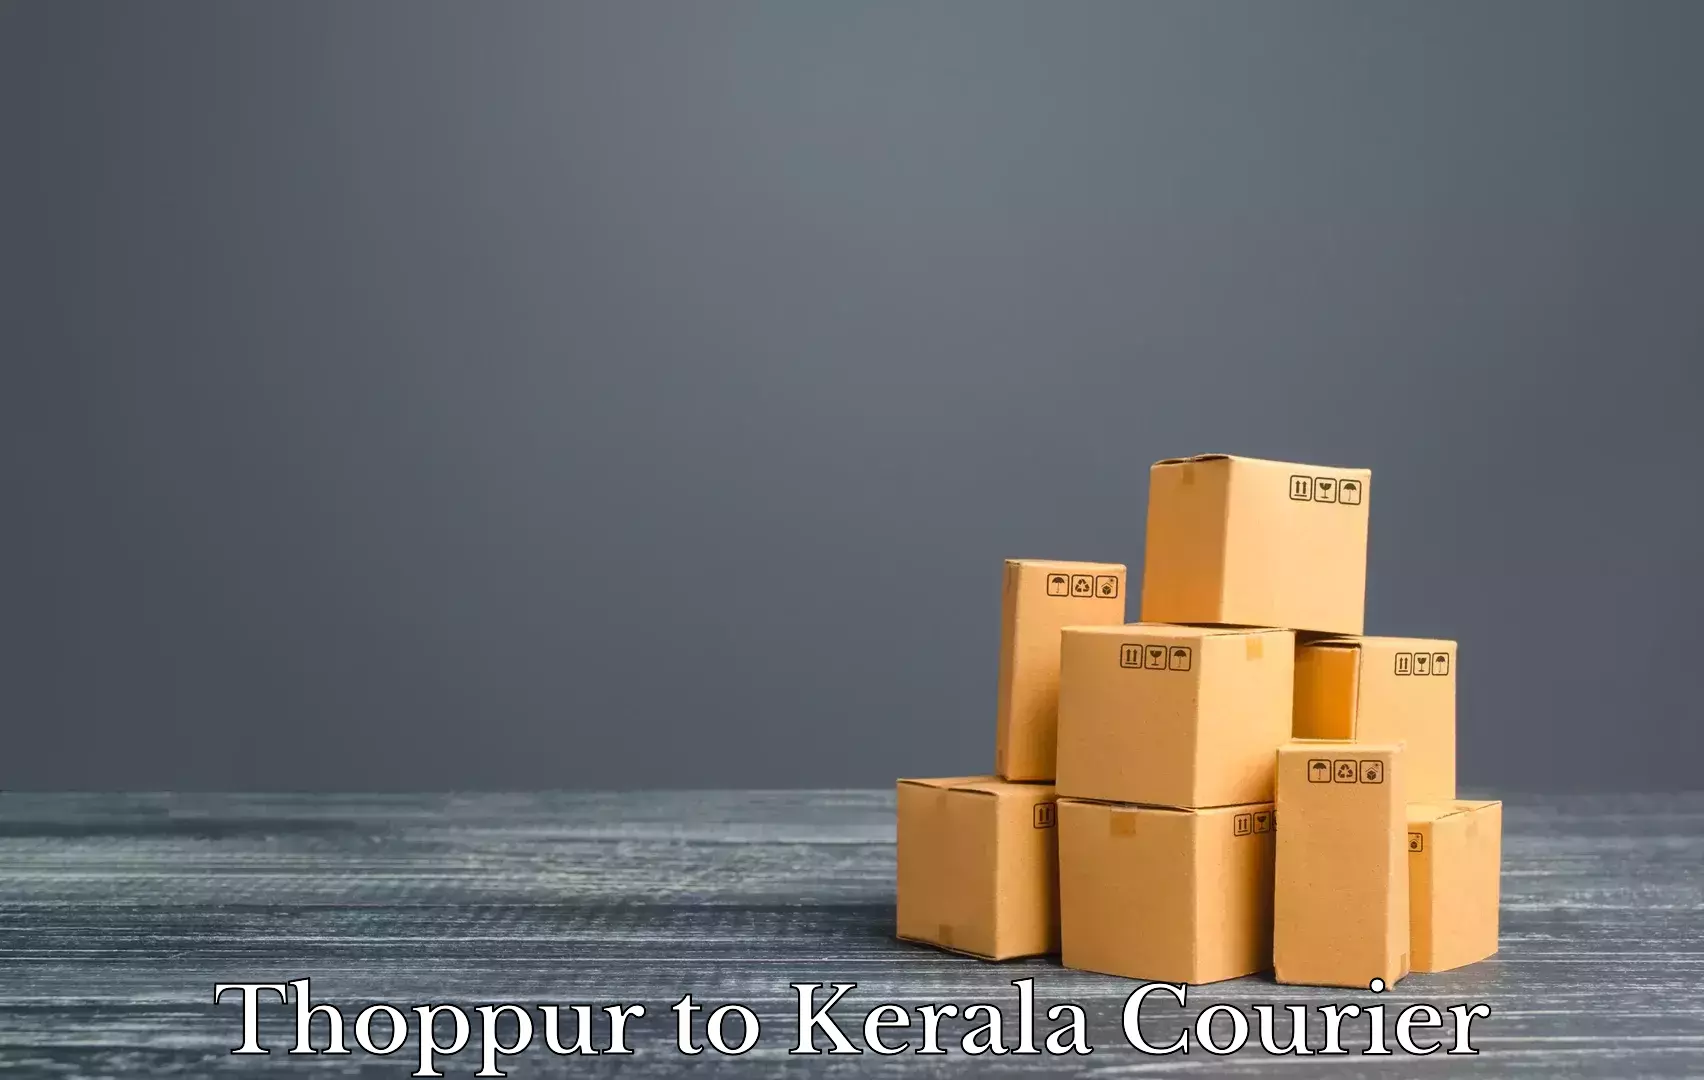 Furniture relocation experts Thoppur to Ramankary